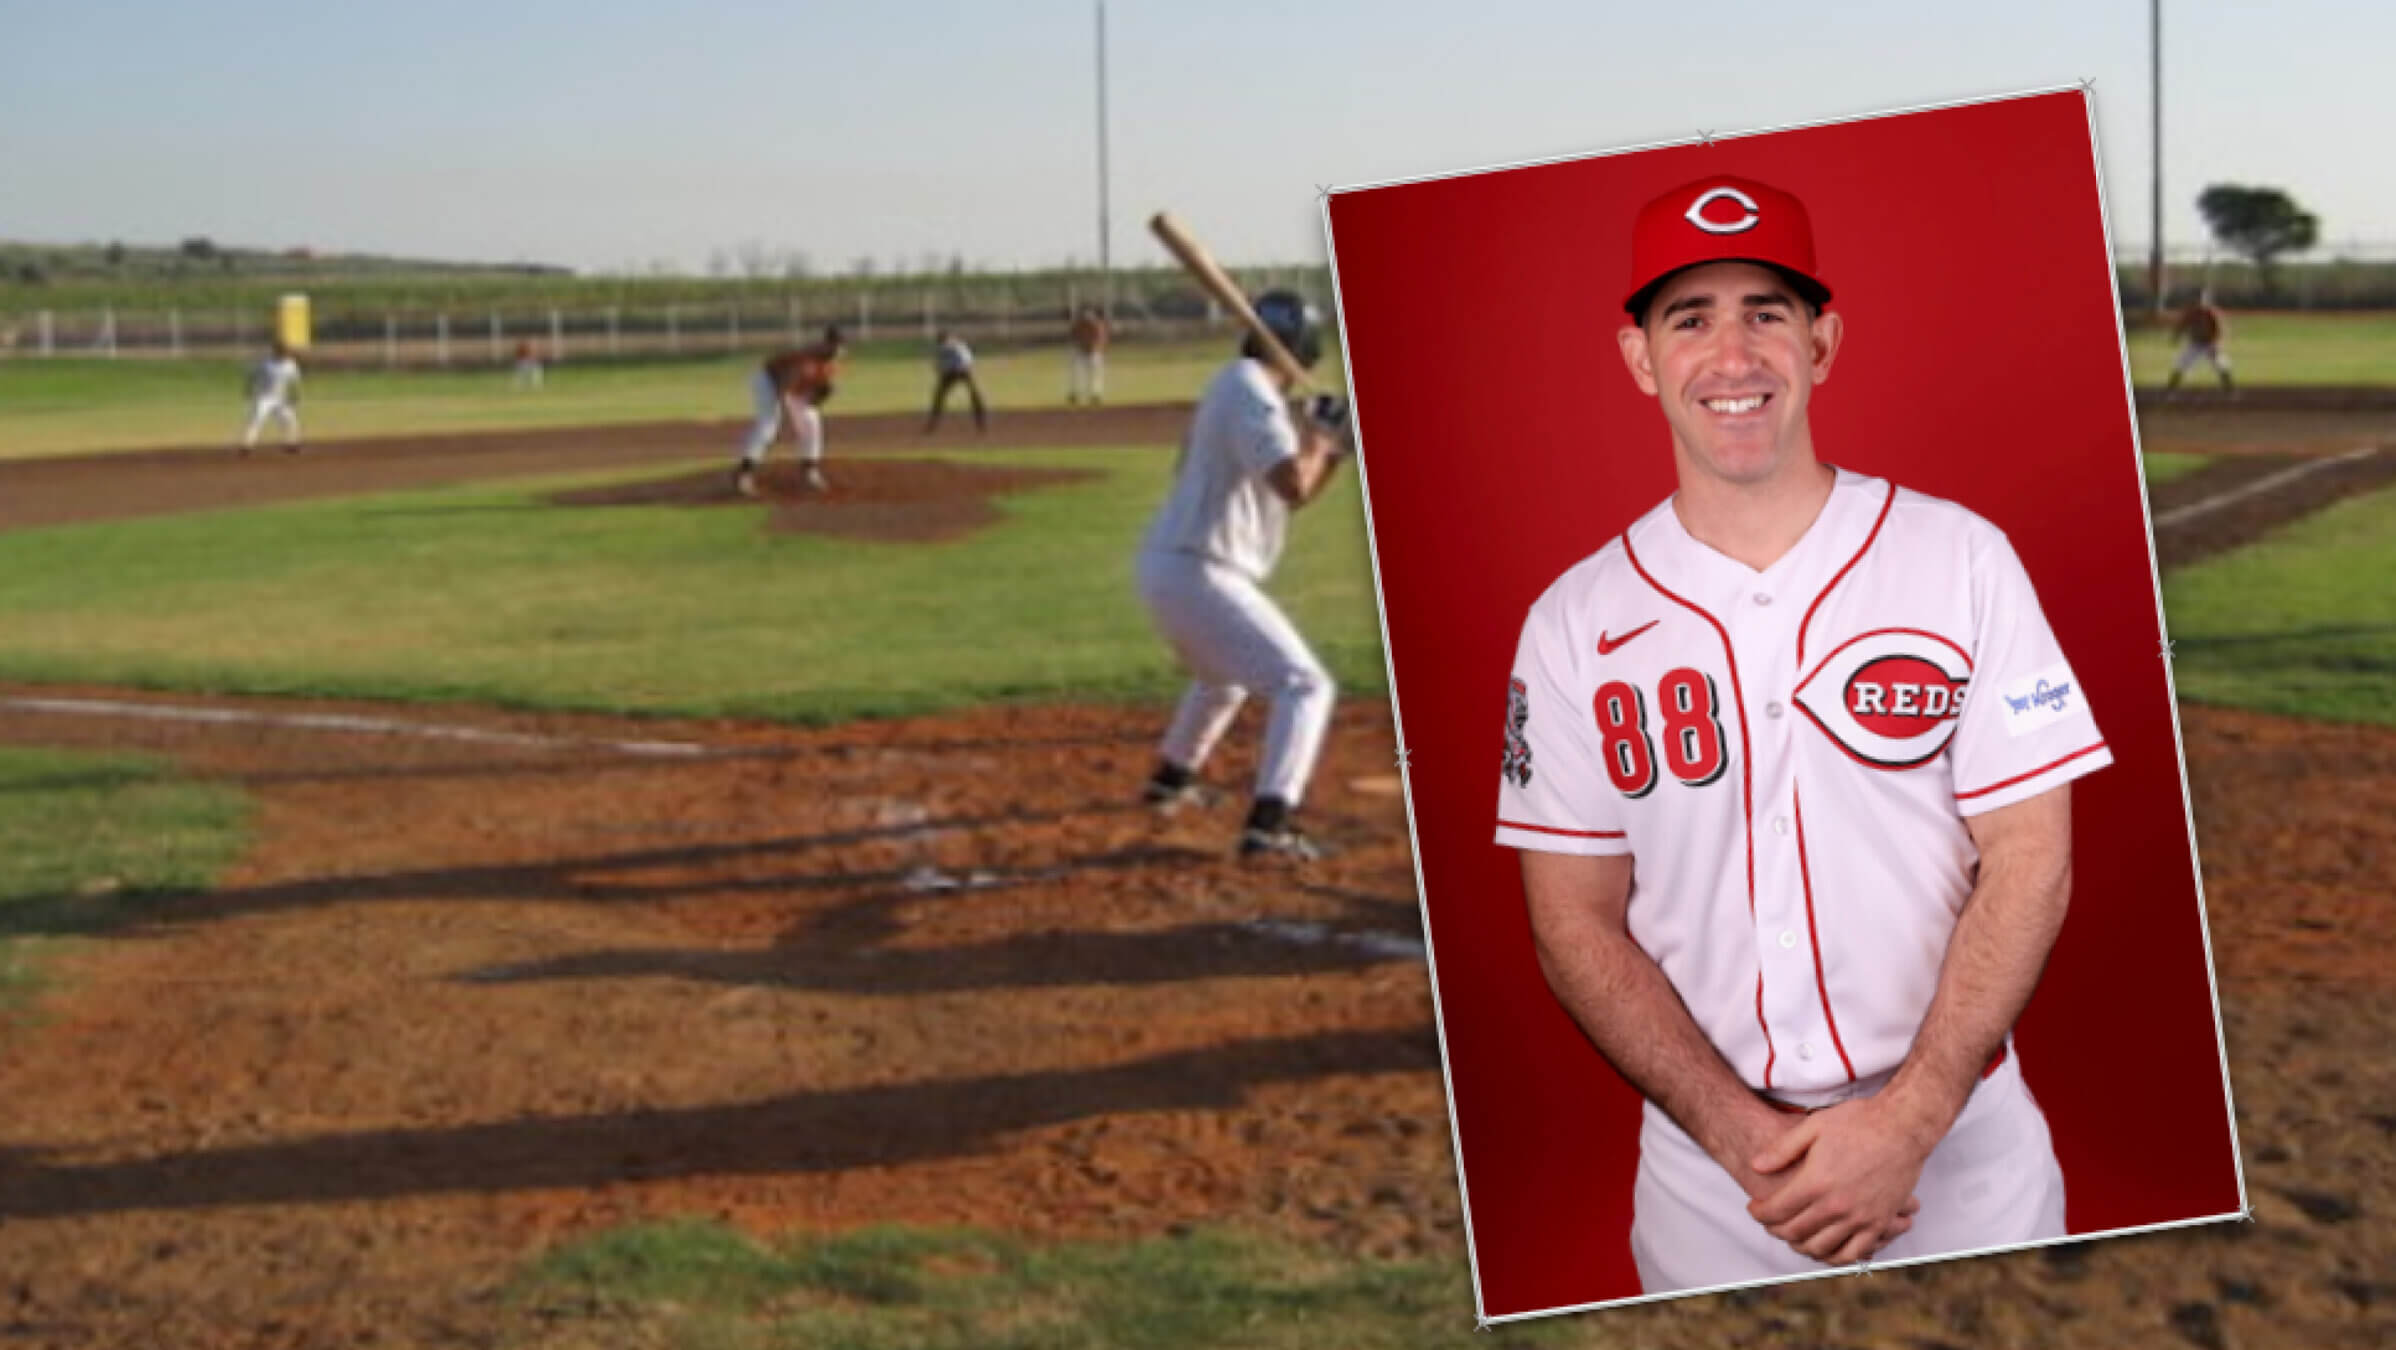 Alon Leichman, a new assistant coach for the Cincinnati Reds. Background is the baseball field on which he learned to play, the first in Israel, on Kibbutz Gezer.